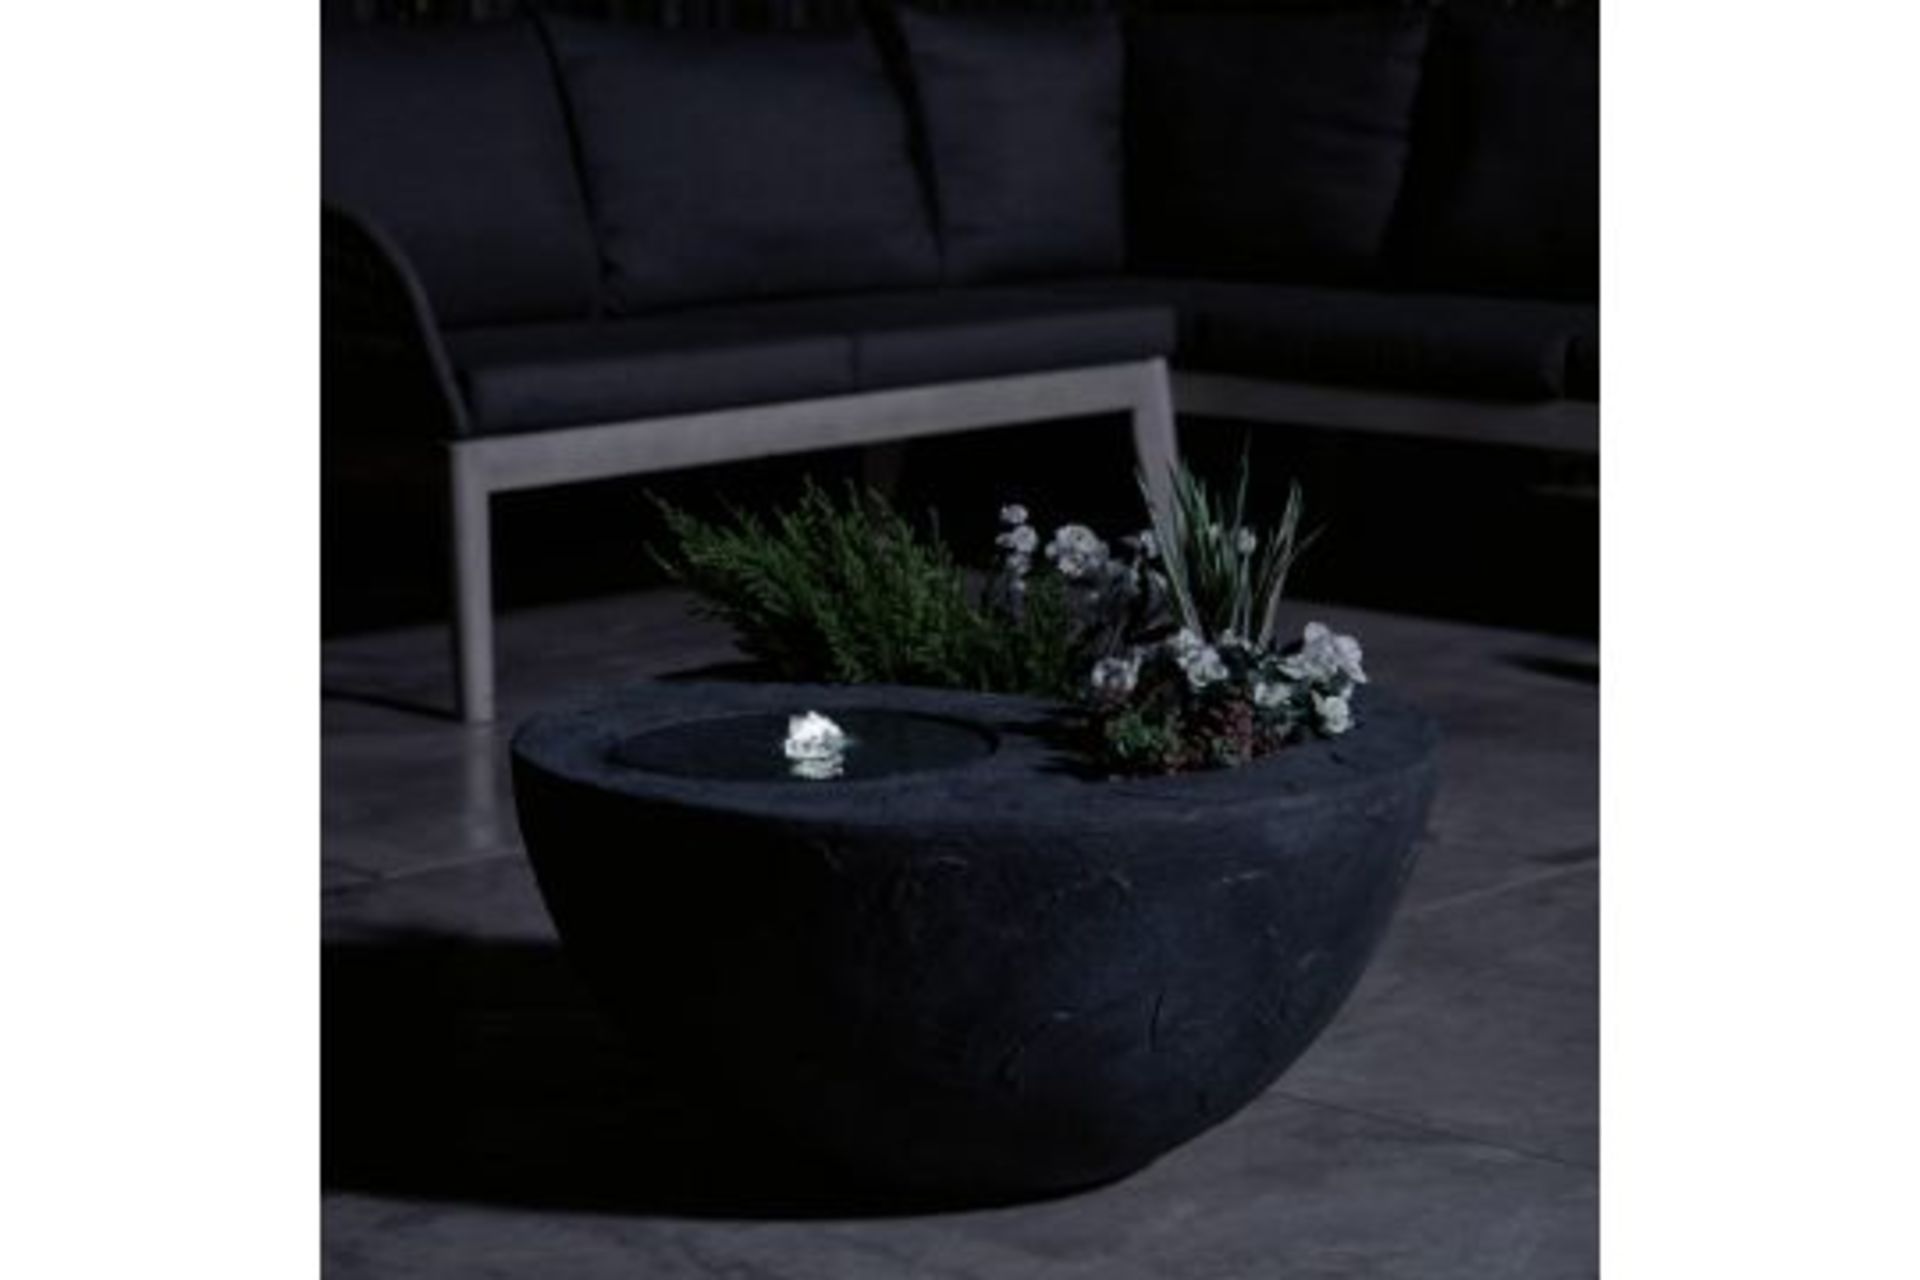 New & Boxed Dual Water Feature and Planter - Garden Bowl Design Planter, Indoor/Outdoor LED Lights - Image 4 of 6